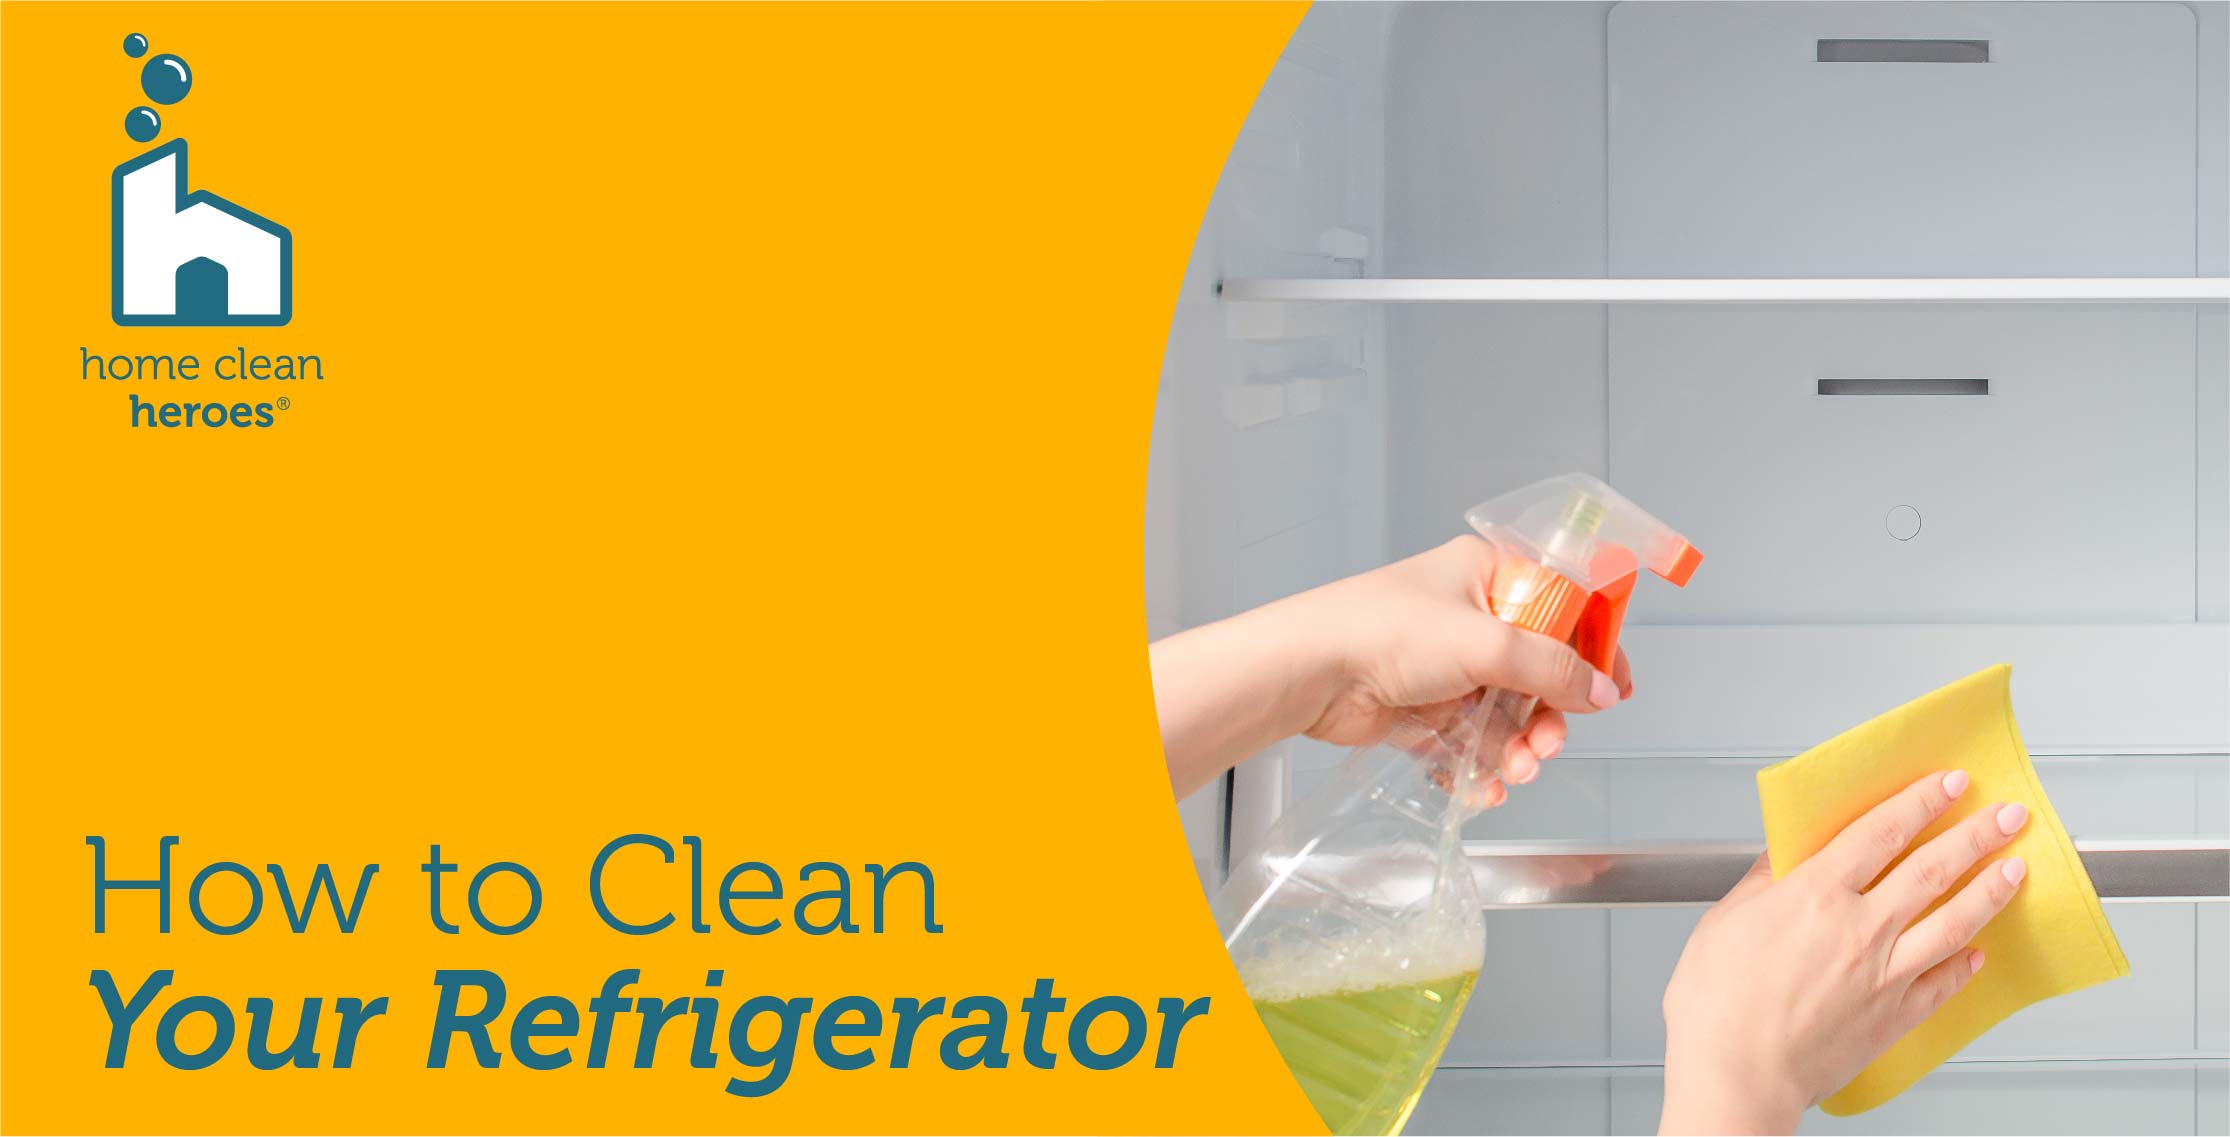 Wiping down a fridge with cleaner and a sponge